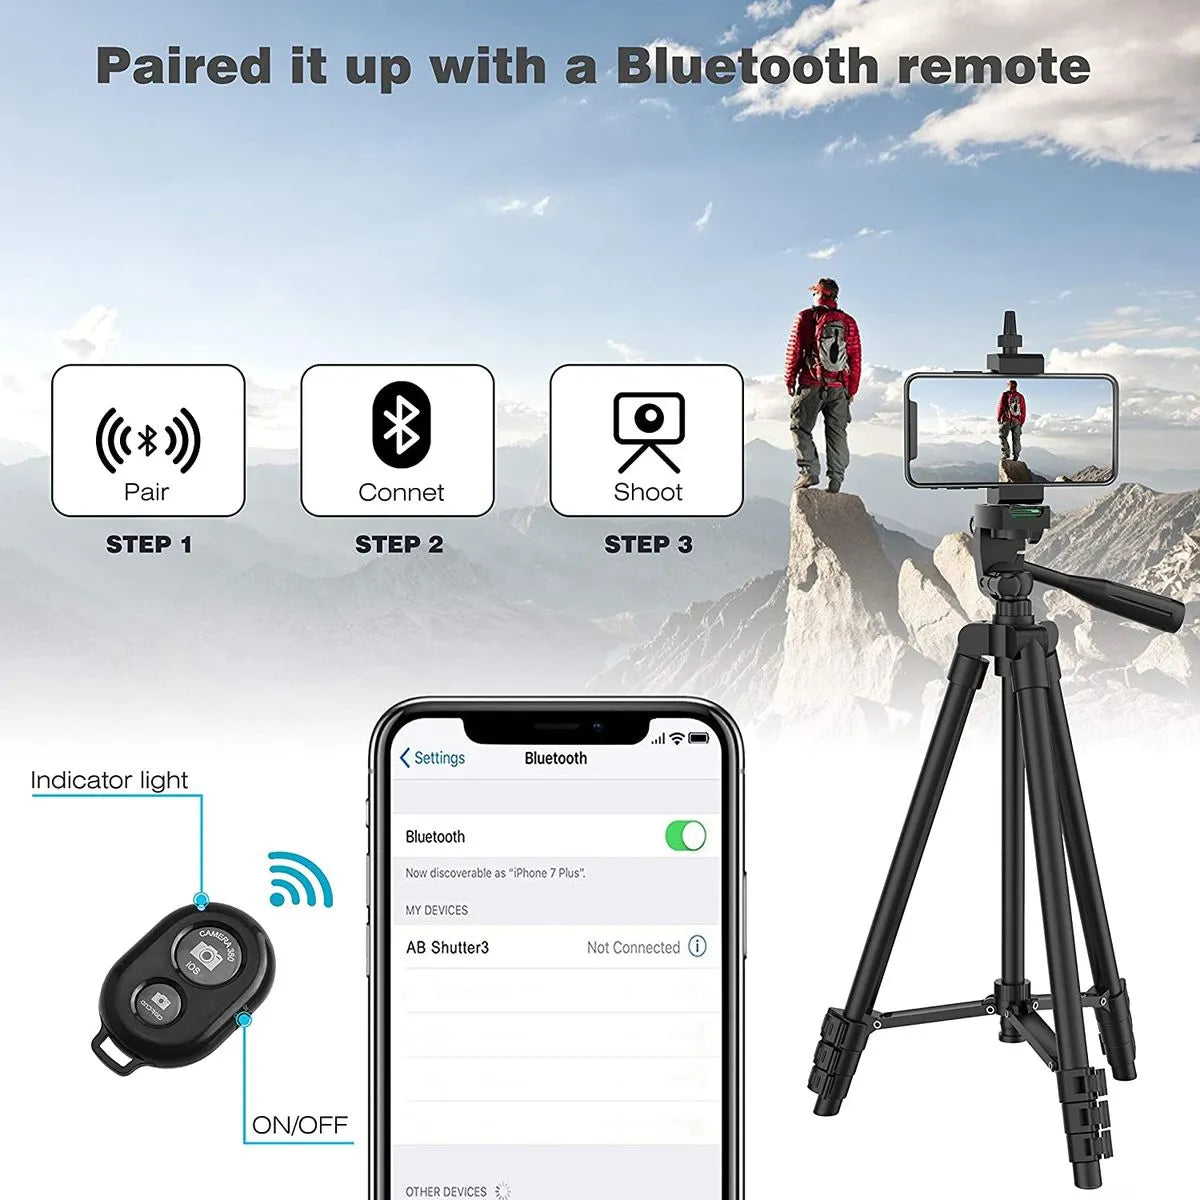 Smartphone stand  Mobile device mount  Cell phone cradle  Phone grip  Universal phone holder  Hands-free phone holder  Adjustable phone stand  Bike phone mount  Car phone holder  Desktop phone holder  Magnetic phone holder  Air vent phone mount  Dashboard phone holder  Windshield phone mount  Bike handlebar phone holder